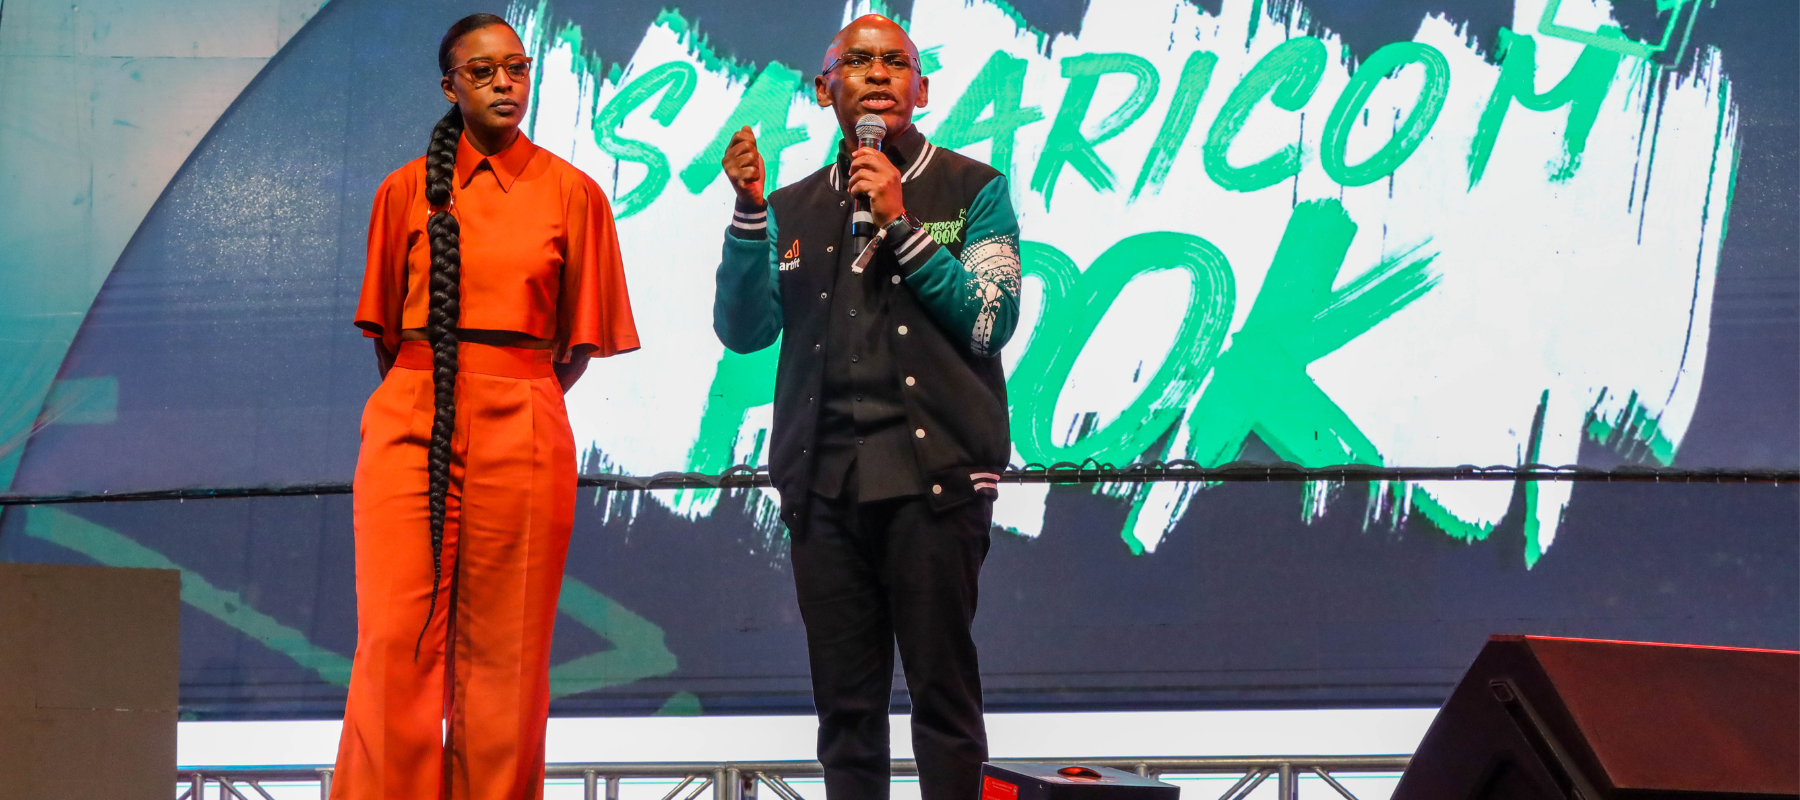 Safaricom targets the creatives in Kenya with a new “S-Hook” platform